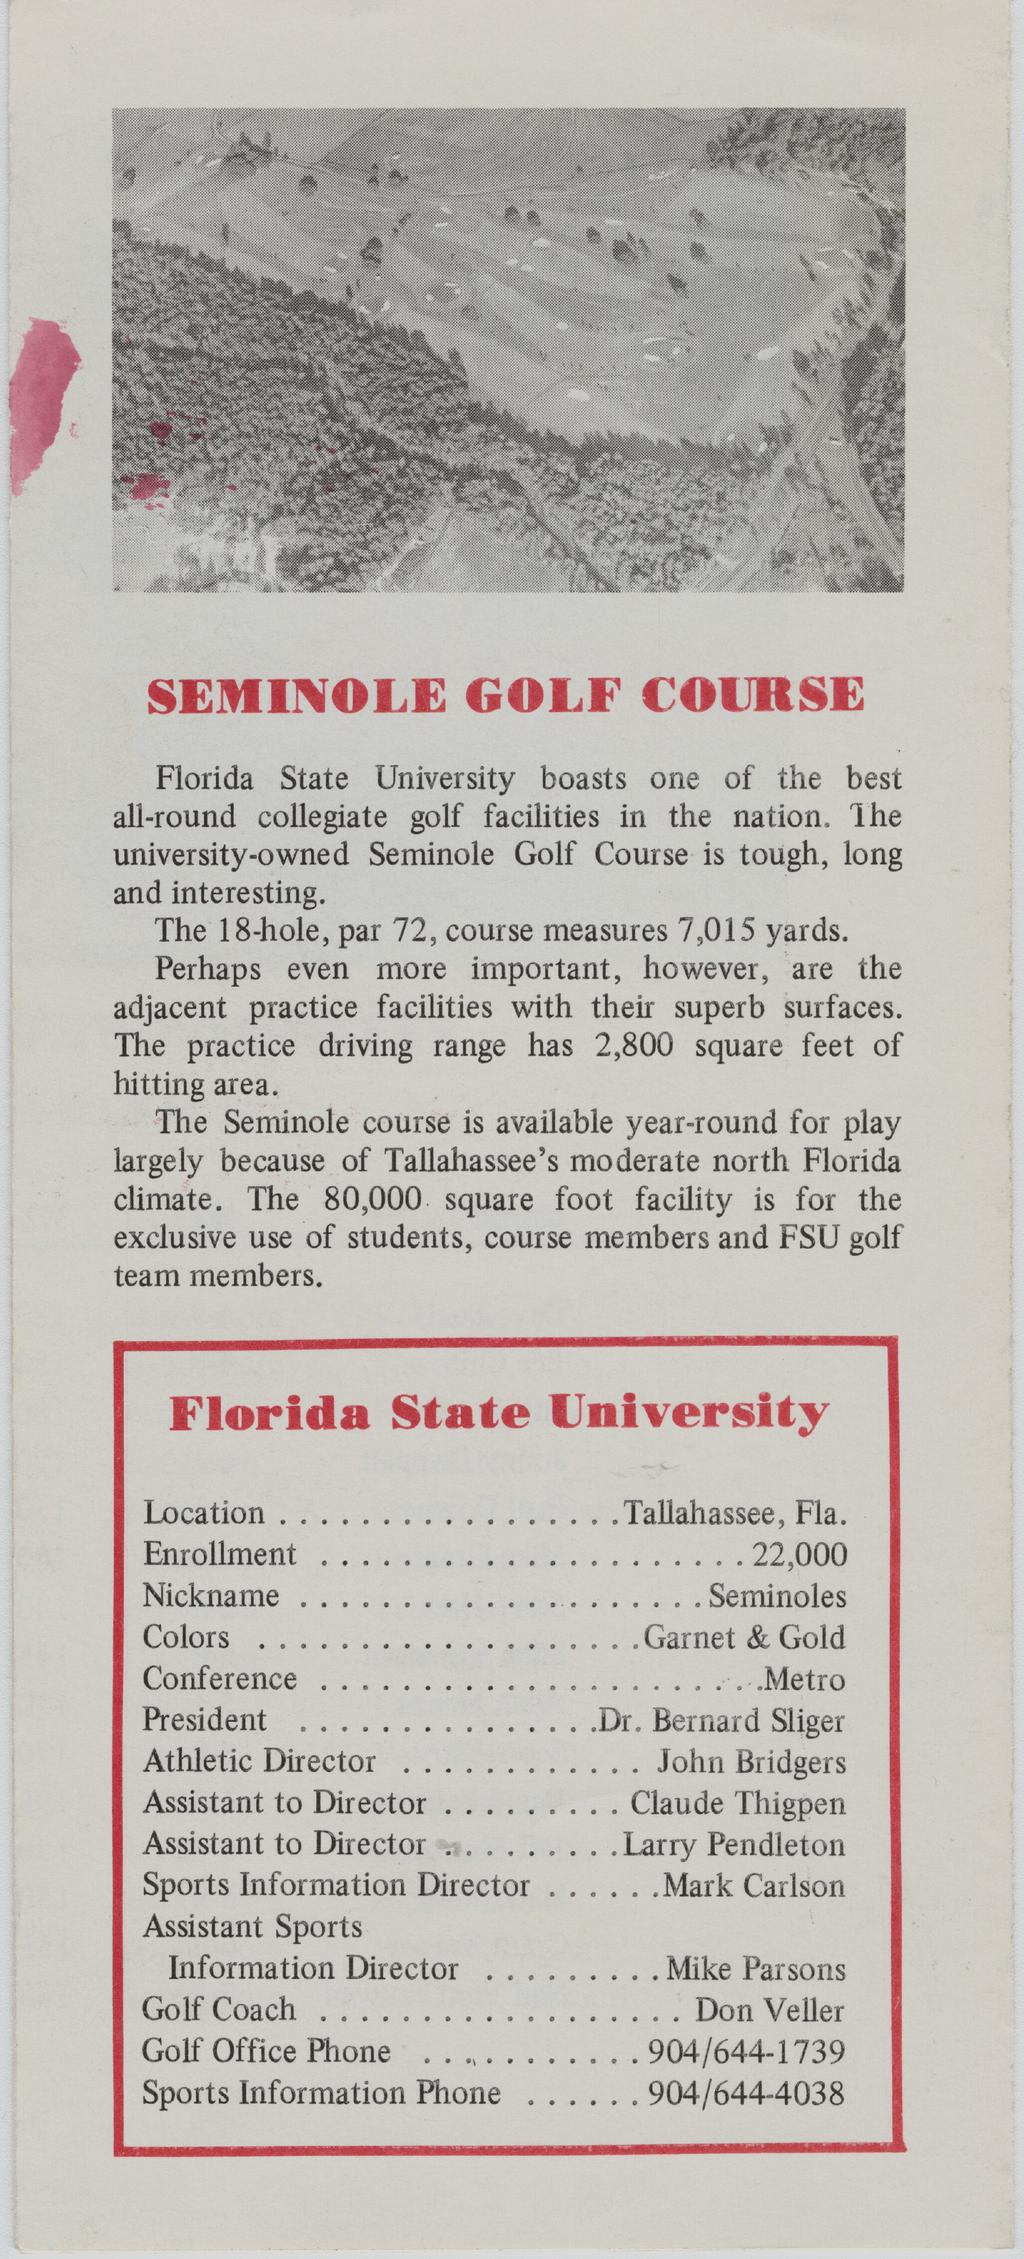 SEMINOLE GOLF COlJRSE Florida State University boasts one of the best all-round collegiate golf facilities in the nation. 1he university-owned Seminole Golf Course is tough, long and interesting.